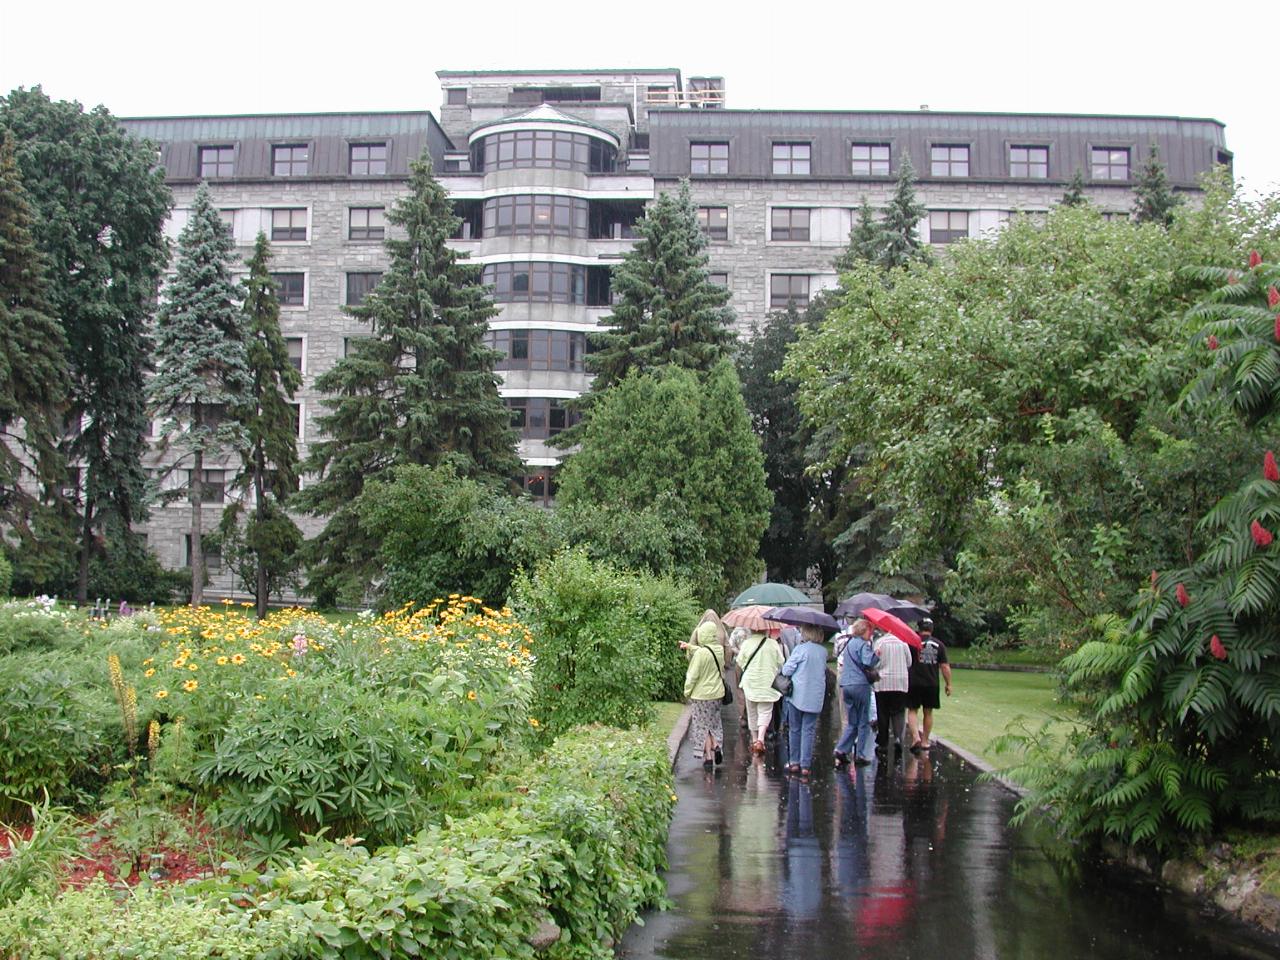 KPLU Tour group at garden of Hotel-Dieu de Montreal, on way to chapel, with hospital in background